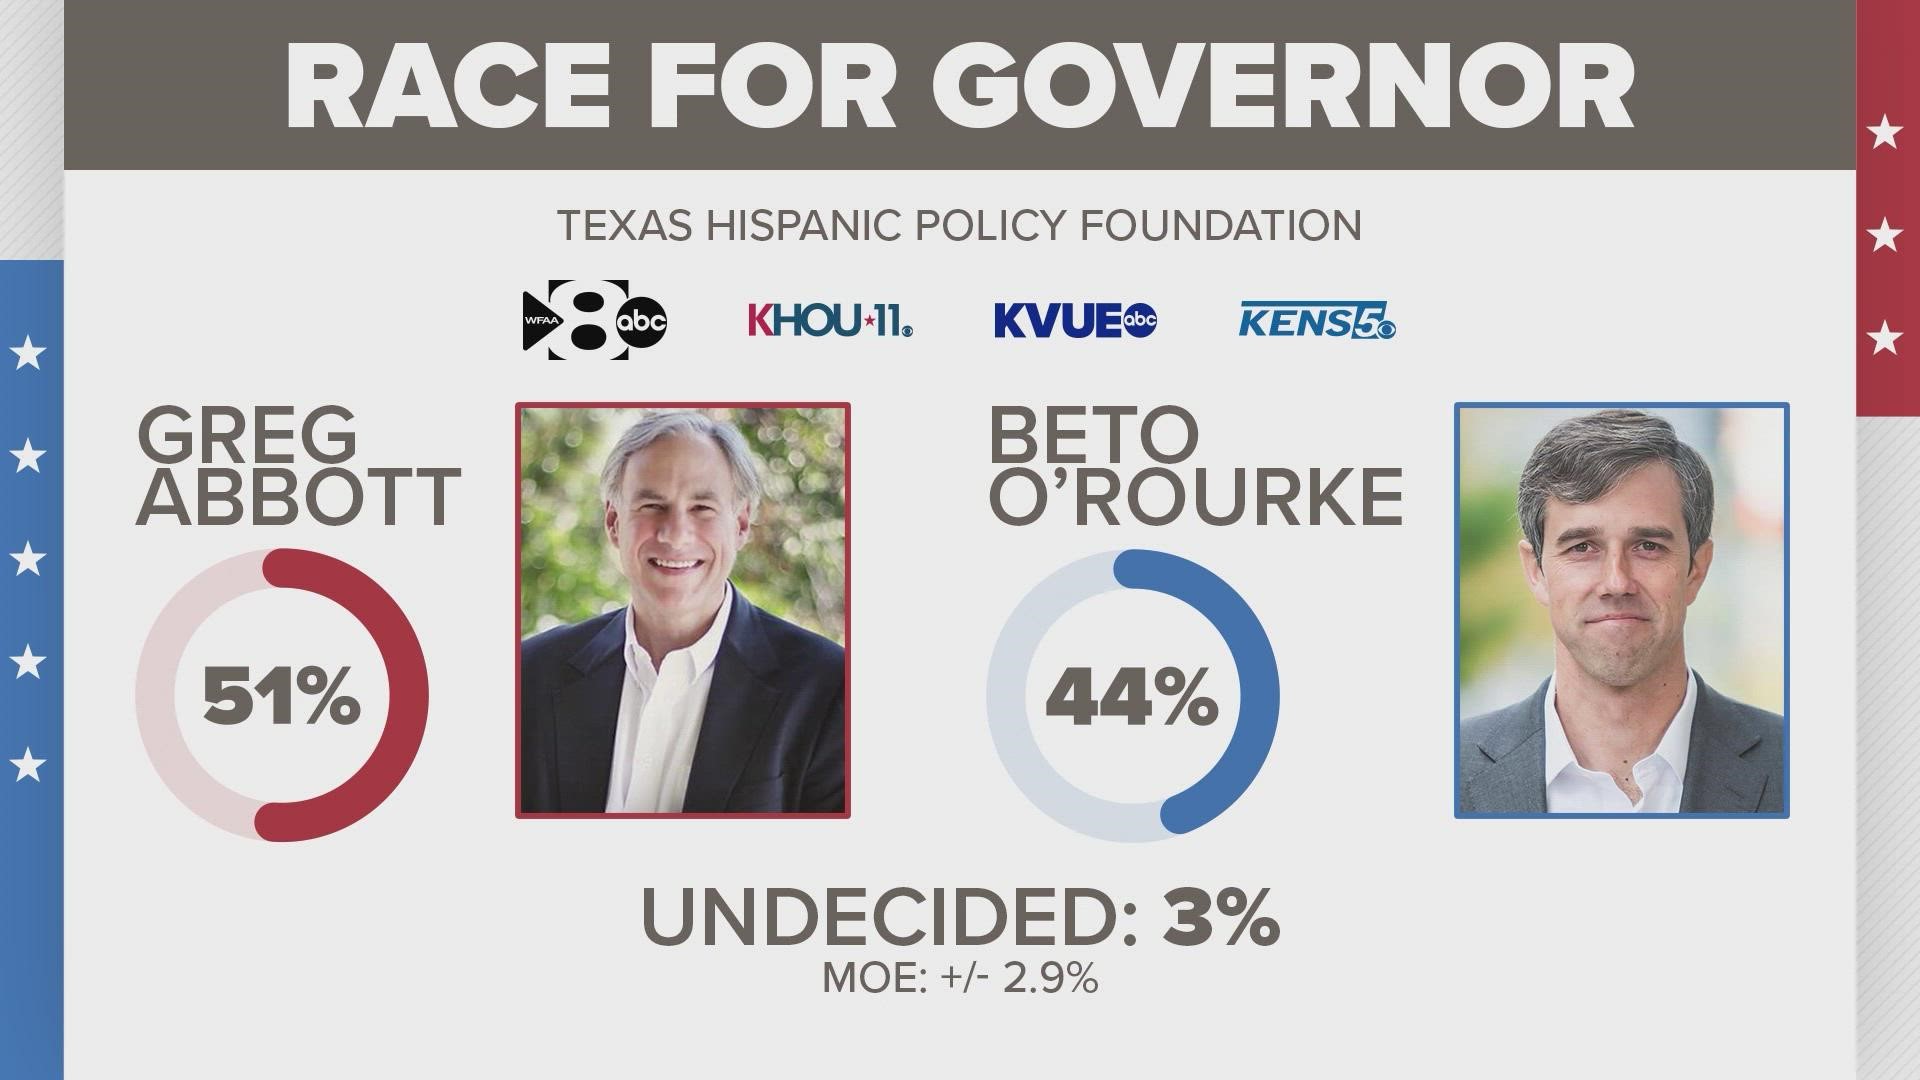 Gov. Greg Abbott has solidified a seven-point lead over Beto O’Rourke, and the vast majority of voters say they won't change their minds. Election day is Nov. 8.